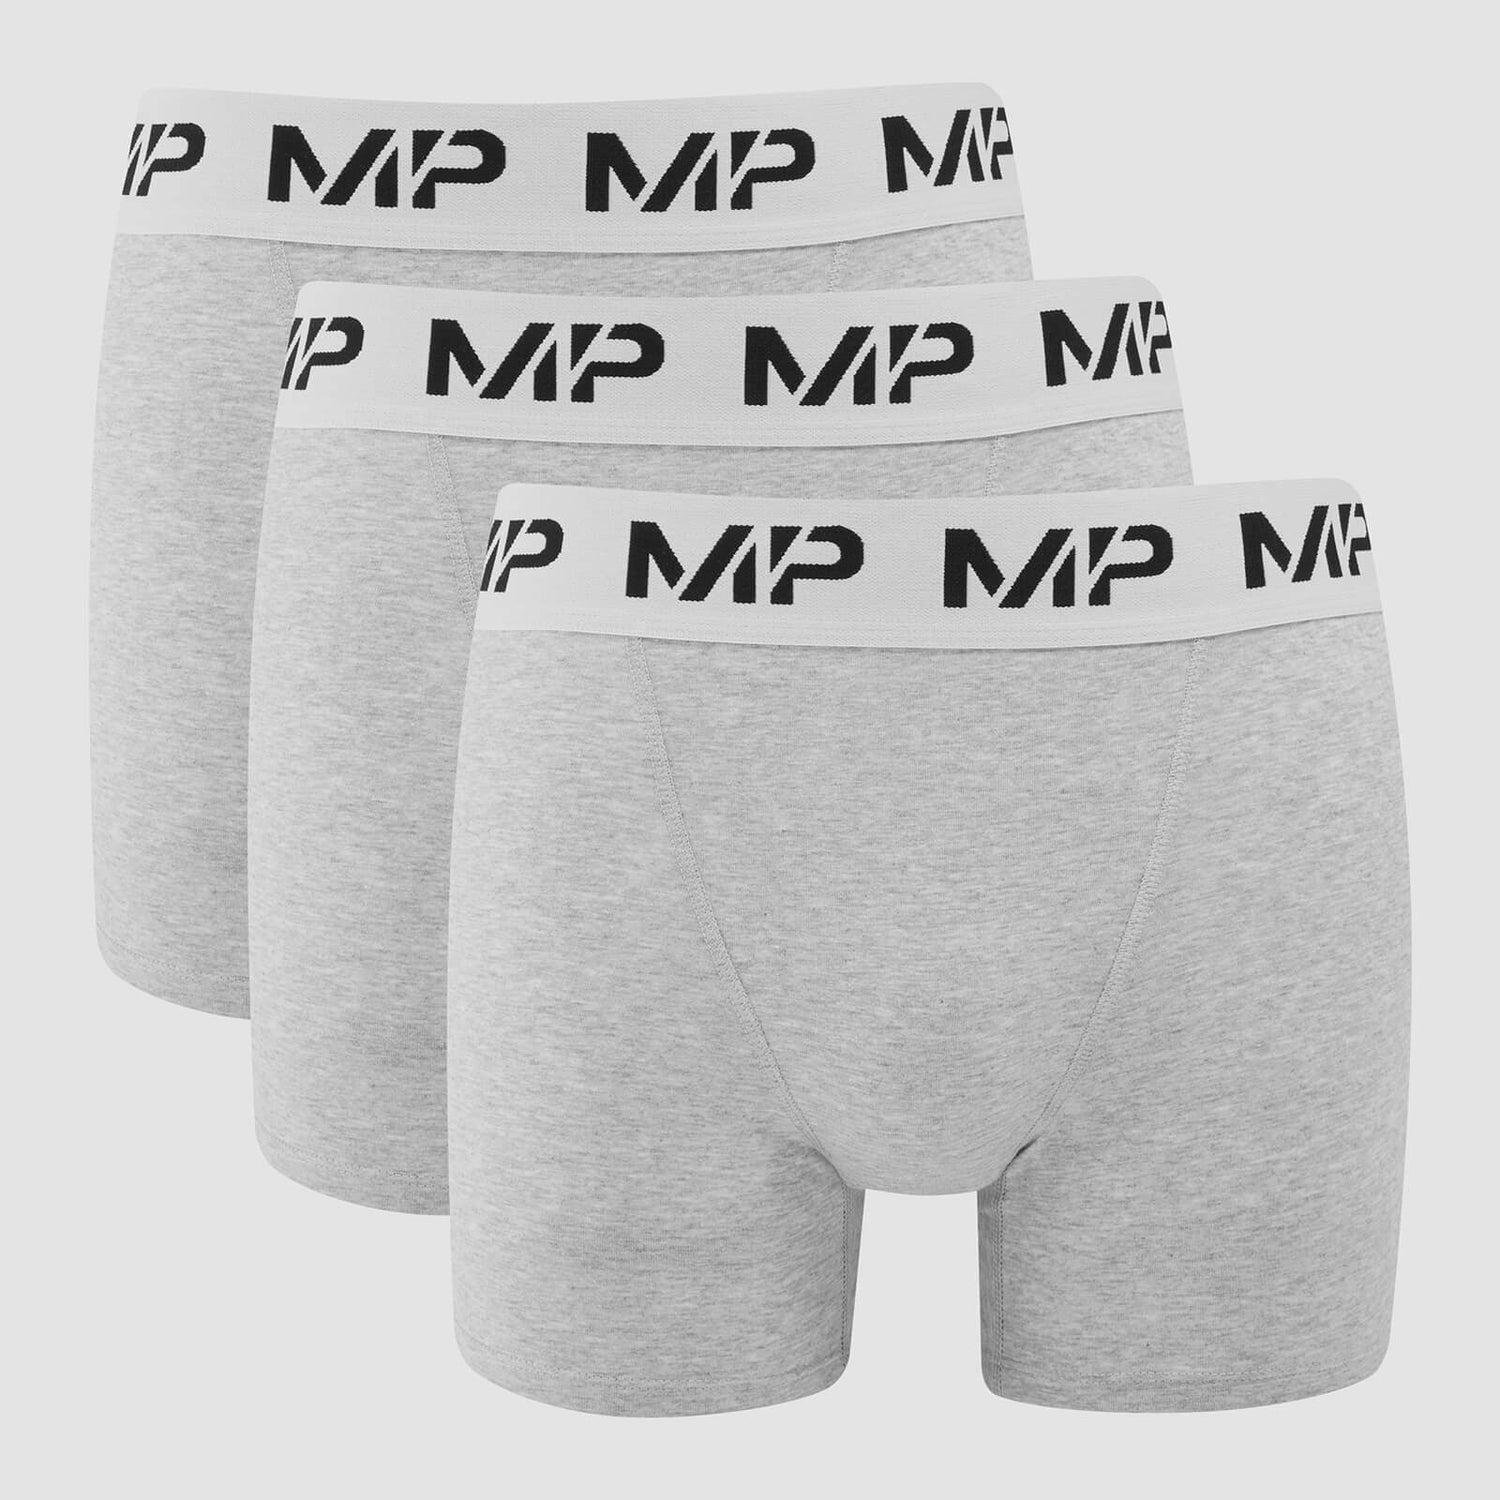 MP Men's Boxers (3 Pack) Grey Marl/White - S